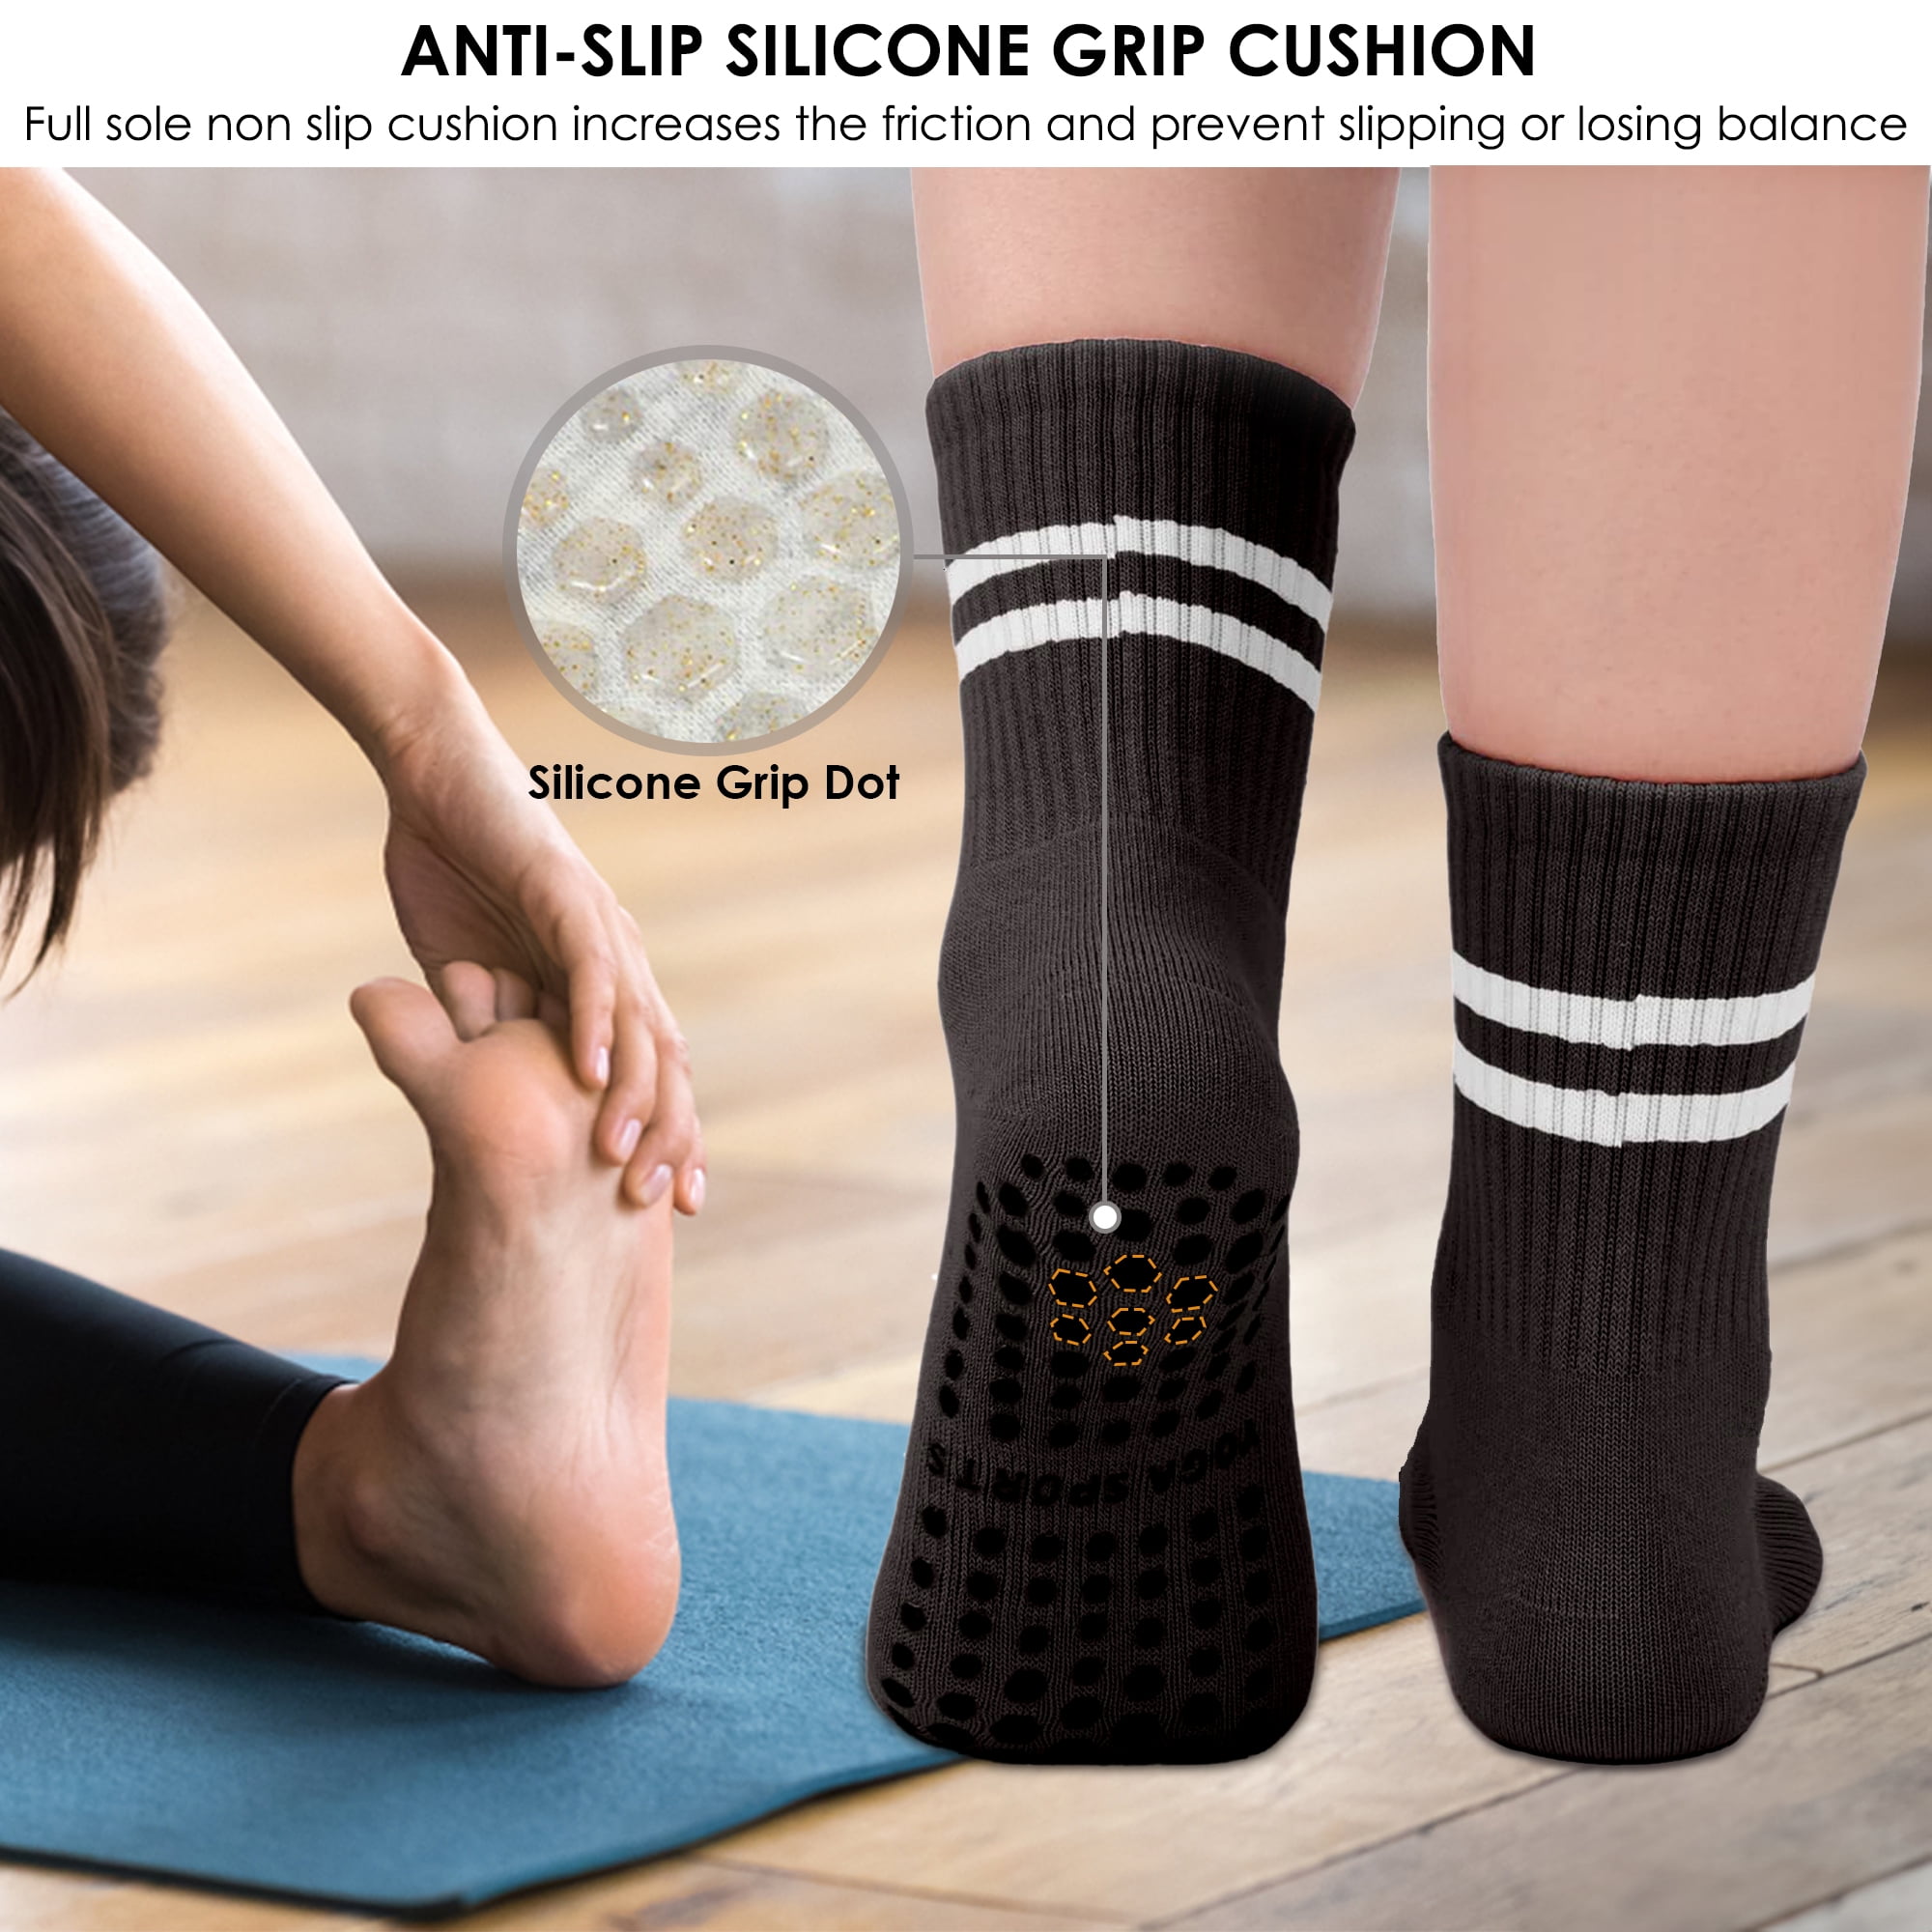  Rbenxia 4 Pair Silicone Dot Cotton Non Slip Skid Yoga Pilates  Socks with Grips Cotton for Women Full Toe Low Cut Non Skid Barre Socks for  Studio Hospital Sports Fitness